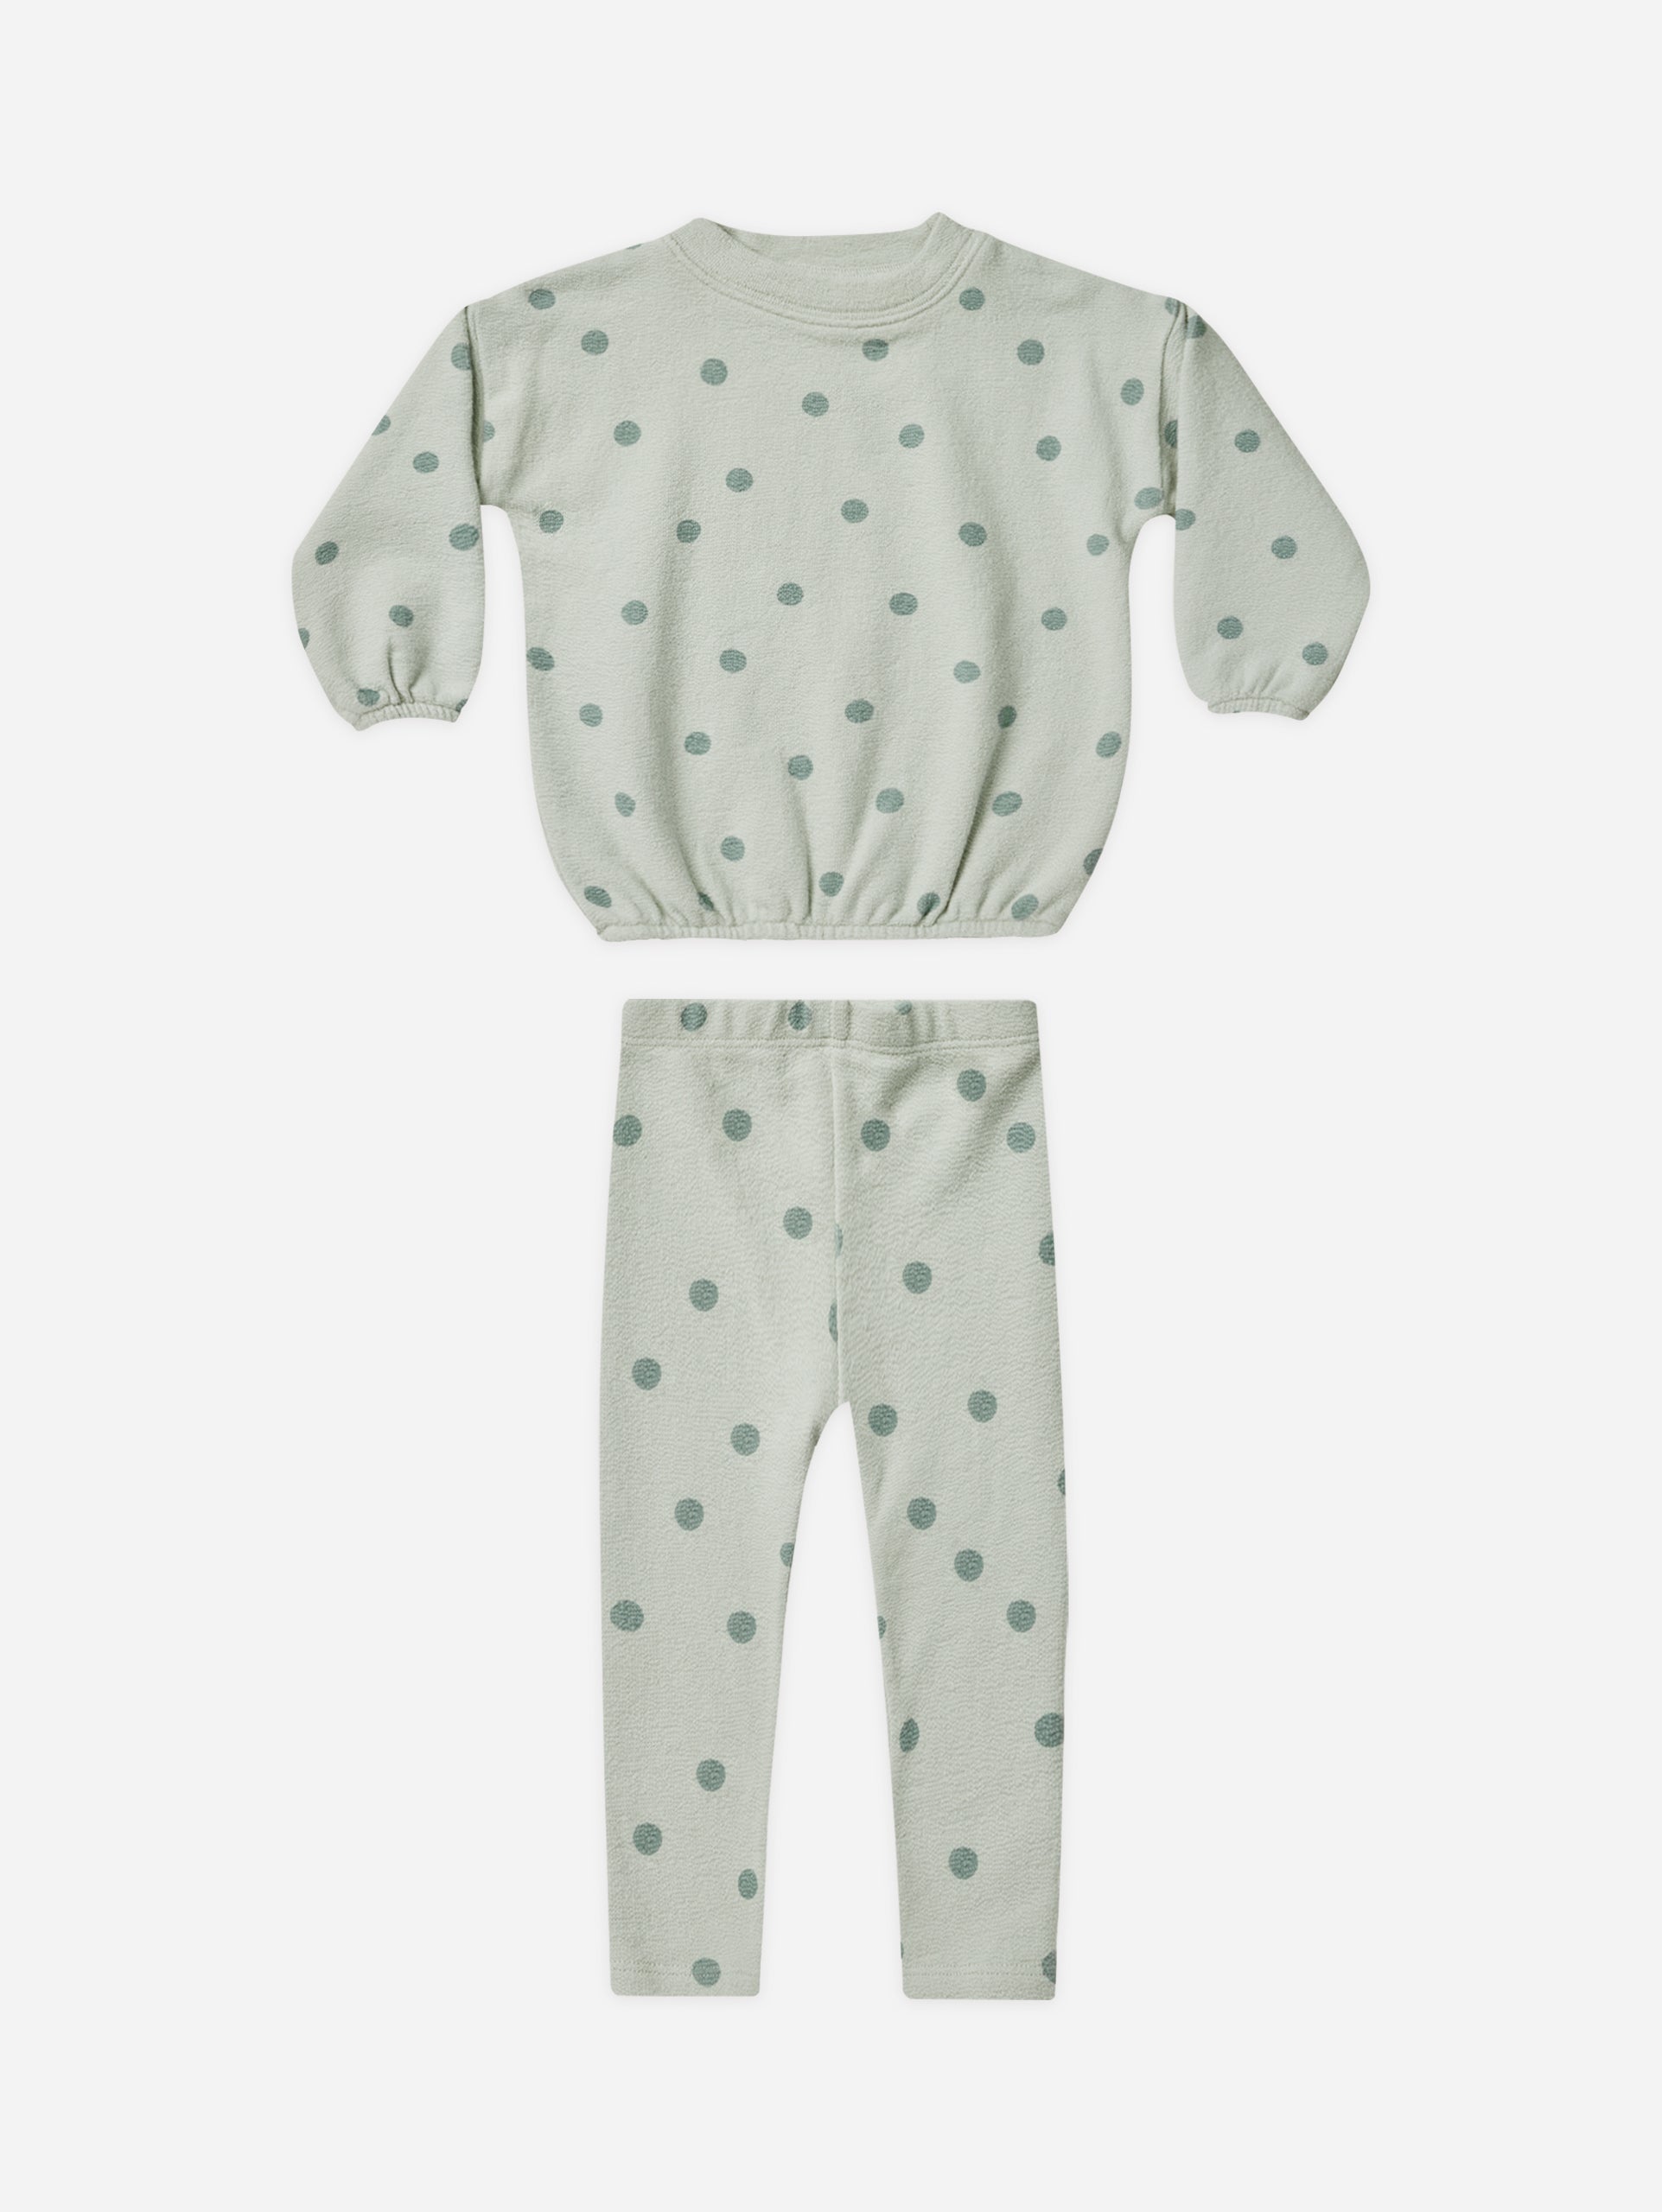 Spongy Knit Set || Polka Dot - Rylee + Cru | Kids Clothes | Trendy Baby Clothes | Modern Infant Outfits |